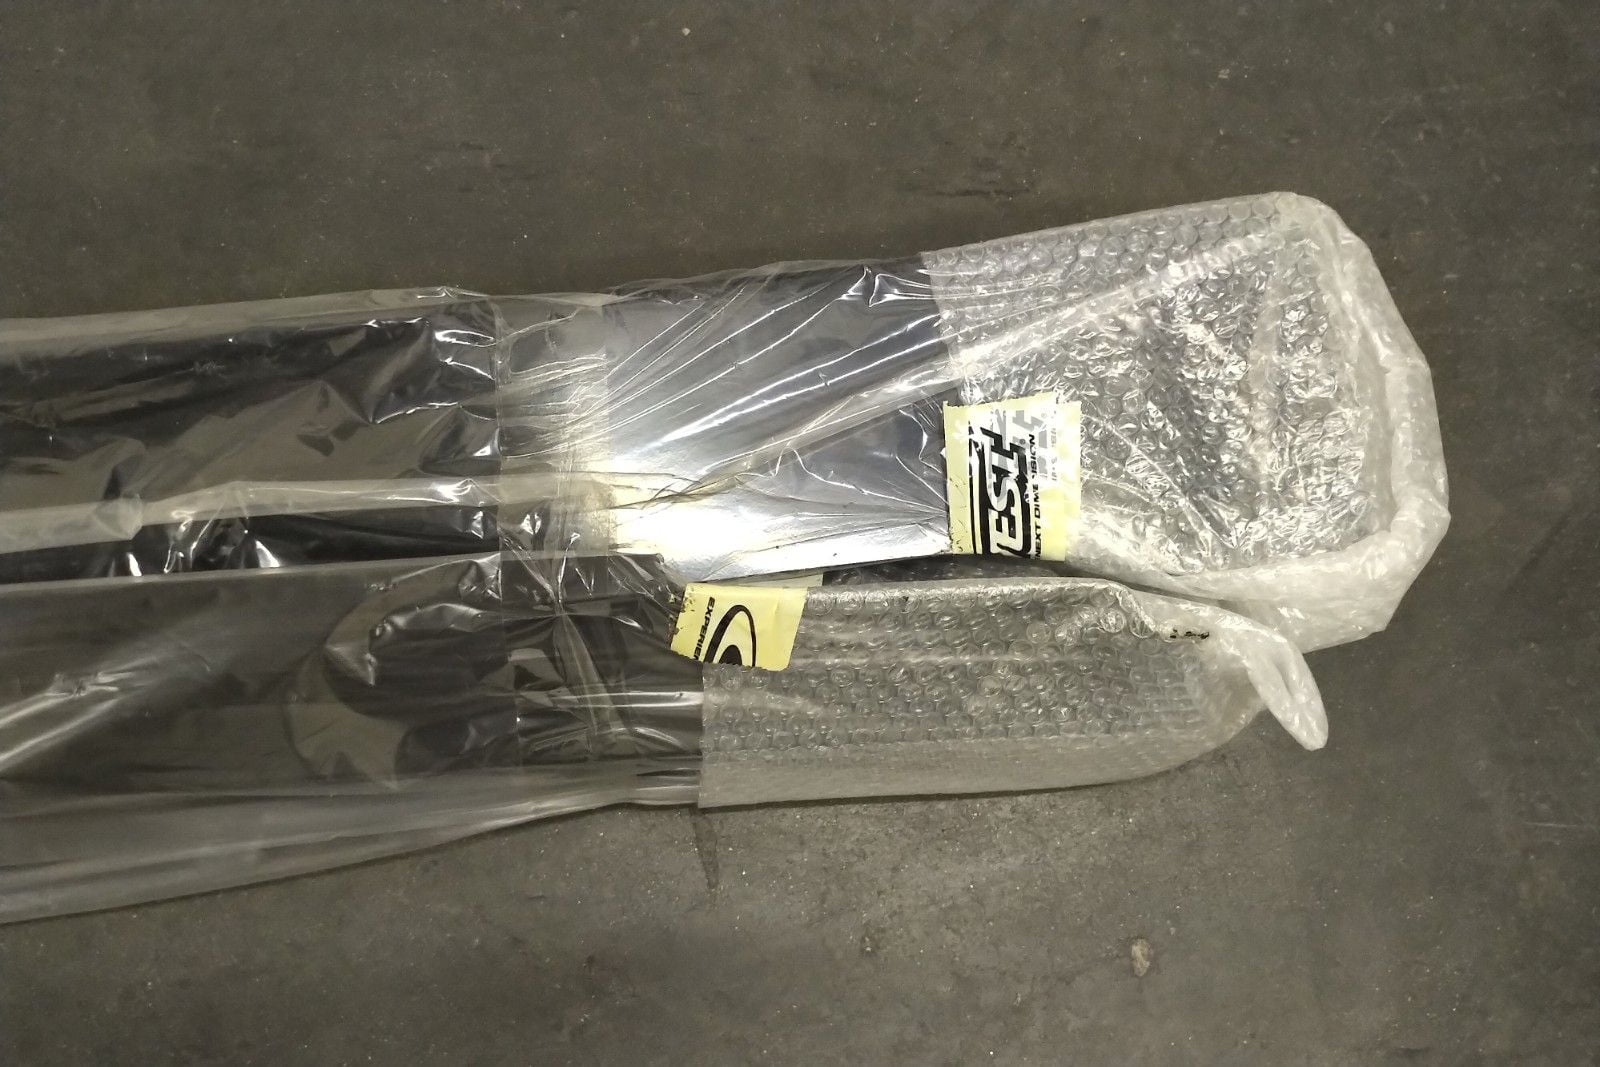 Miscellaneous - Mass Part Out - Aftermarket New Used - OE Exhaust - Used - All Years  All Models - Whittier, CA 90605, United States